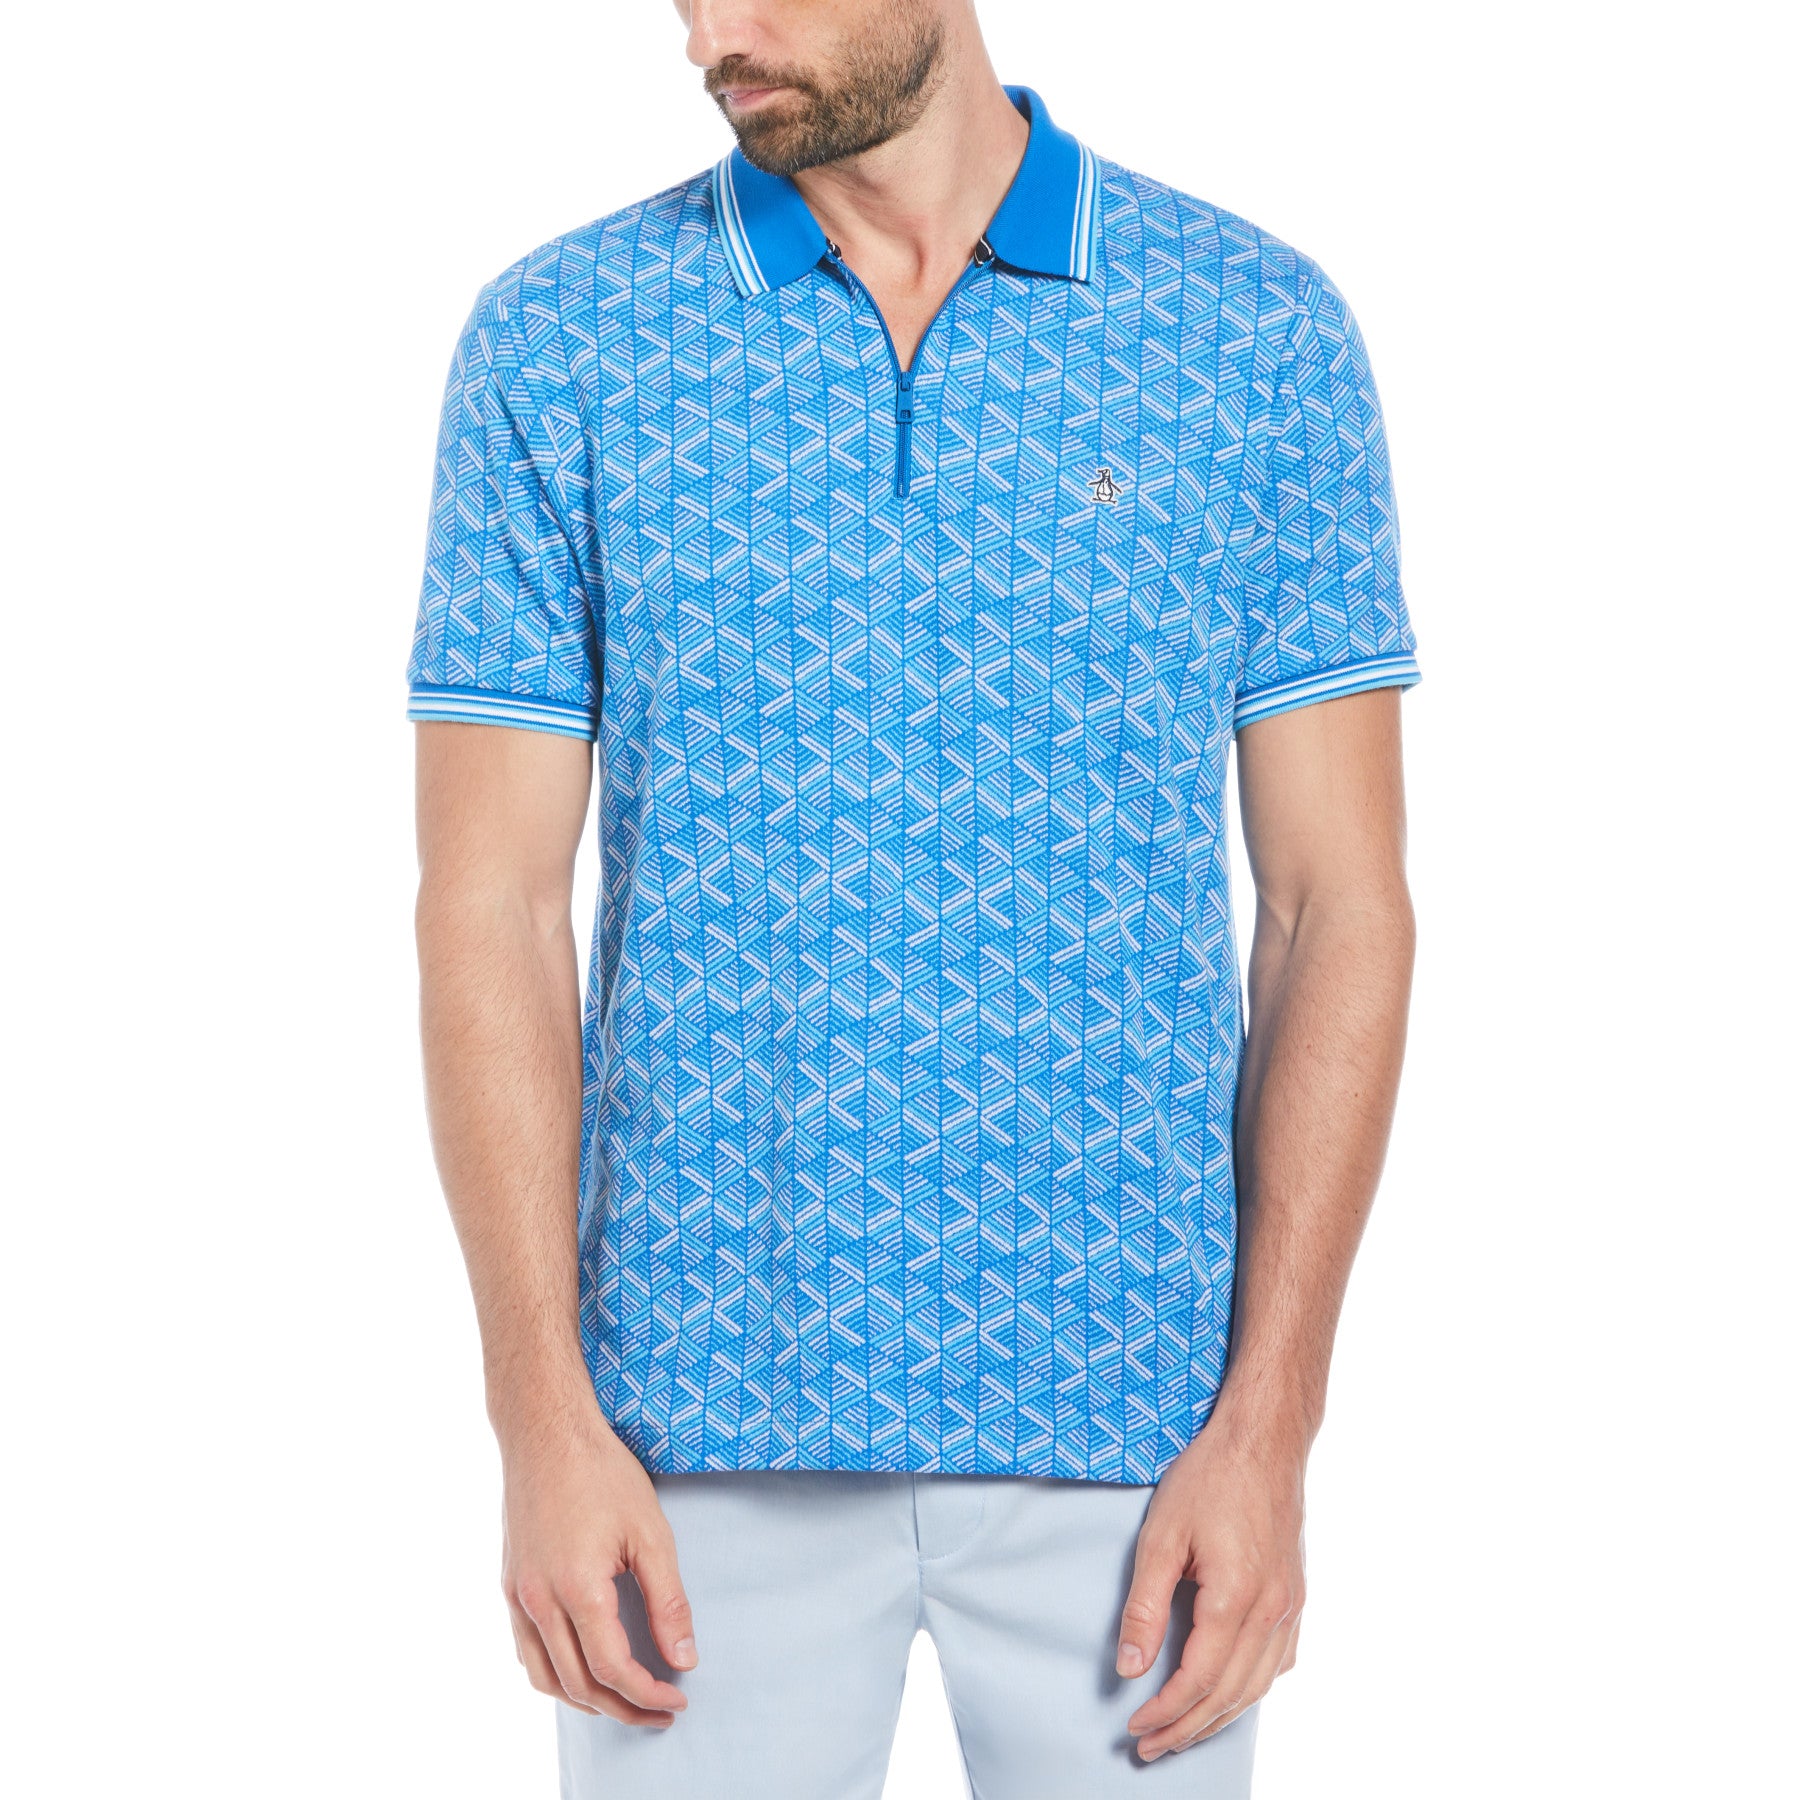 View Jacquard Geometric Print 14 Zip Short Sleeve Polo Shirt In Skydiver information